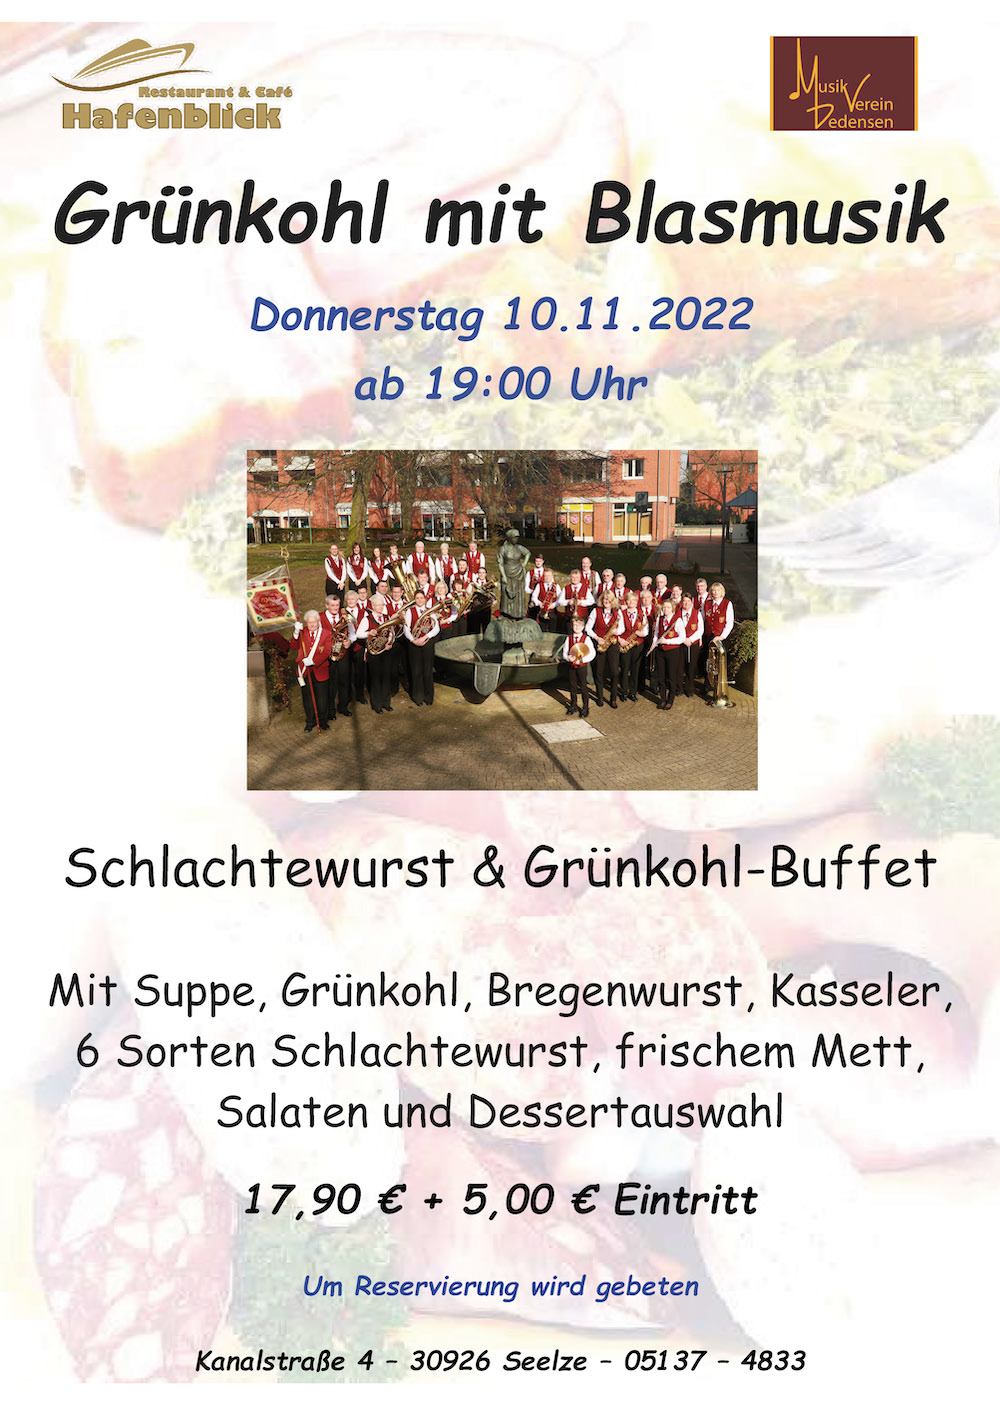 You are currently viewing Grünkohl mit Blasmusik